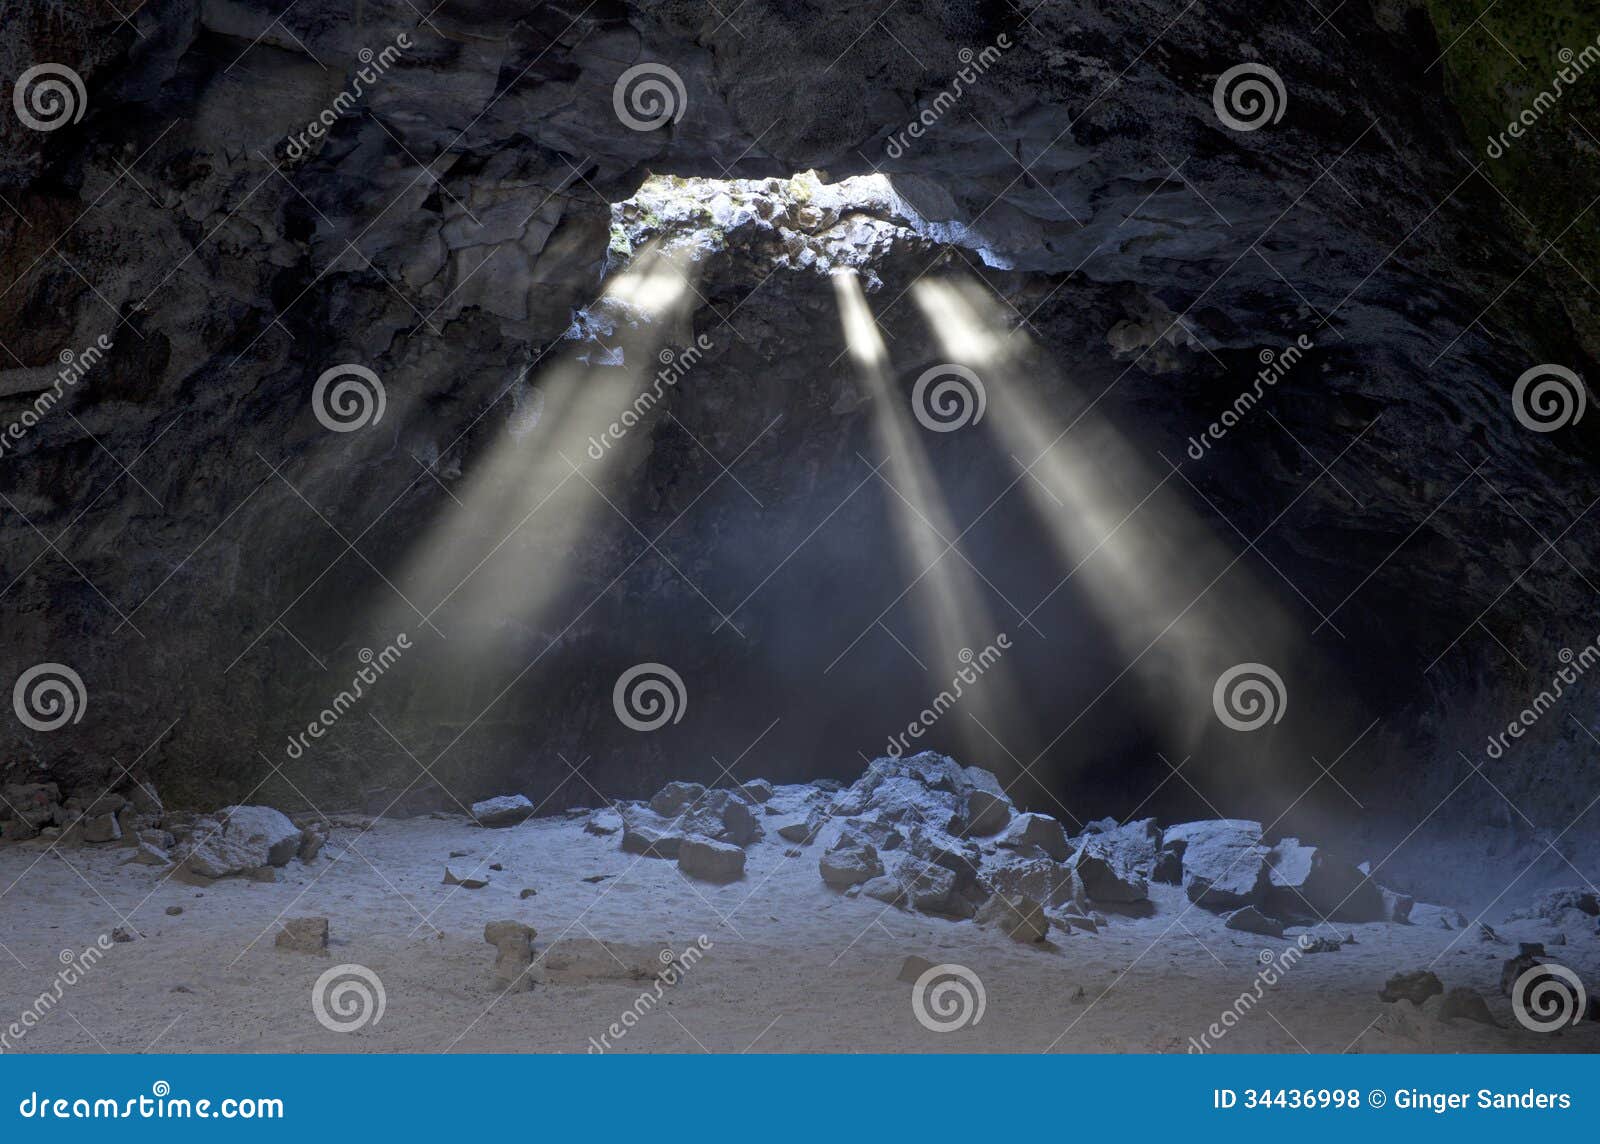 sunbeams from skylight in cave